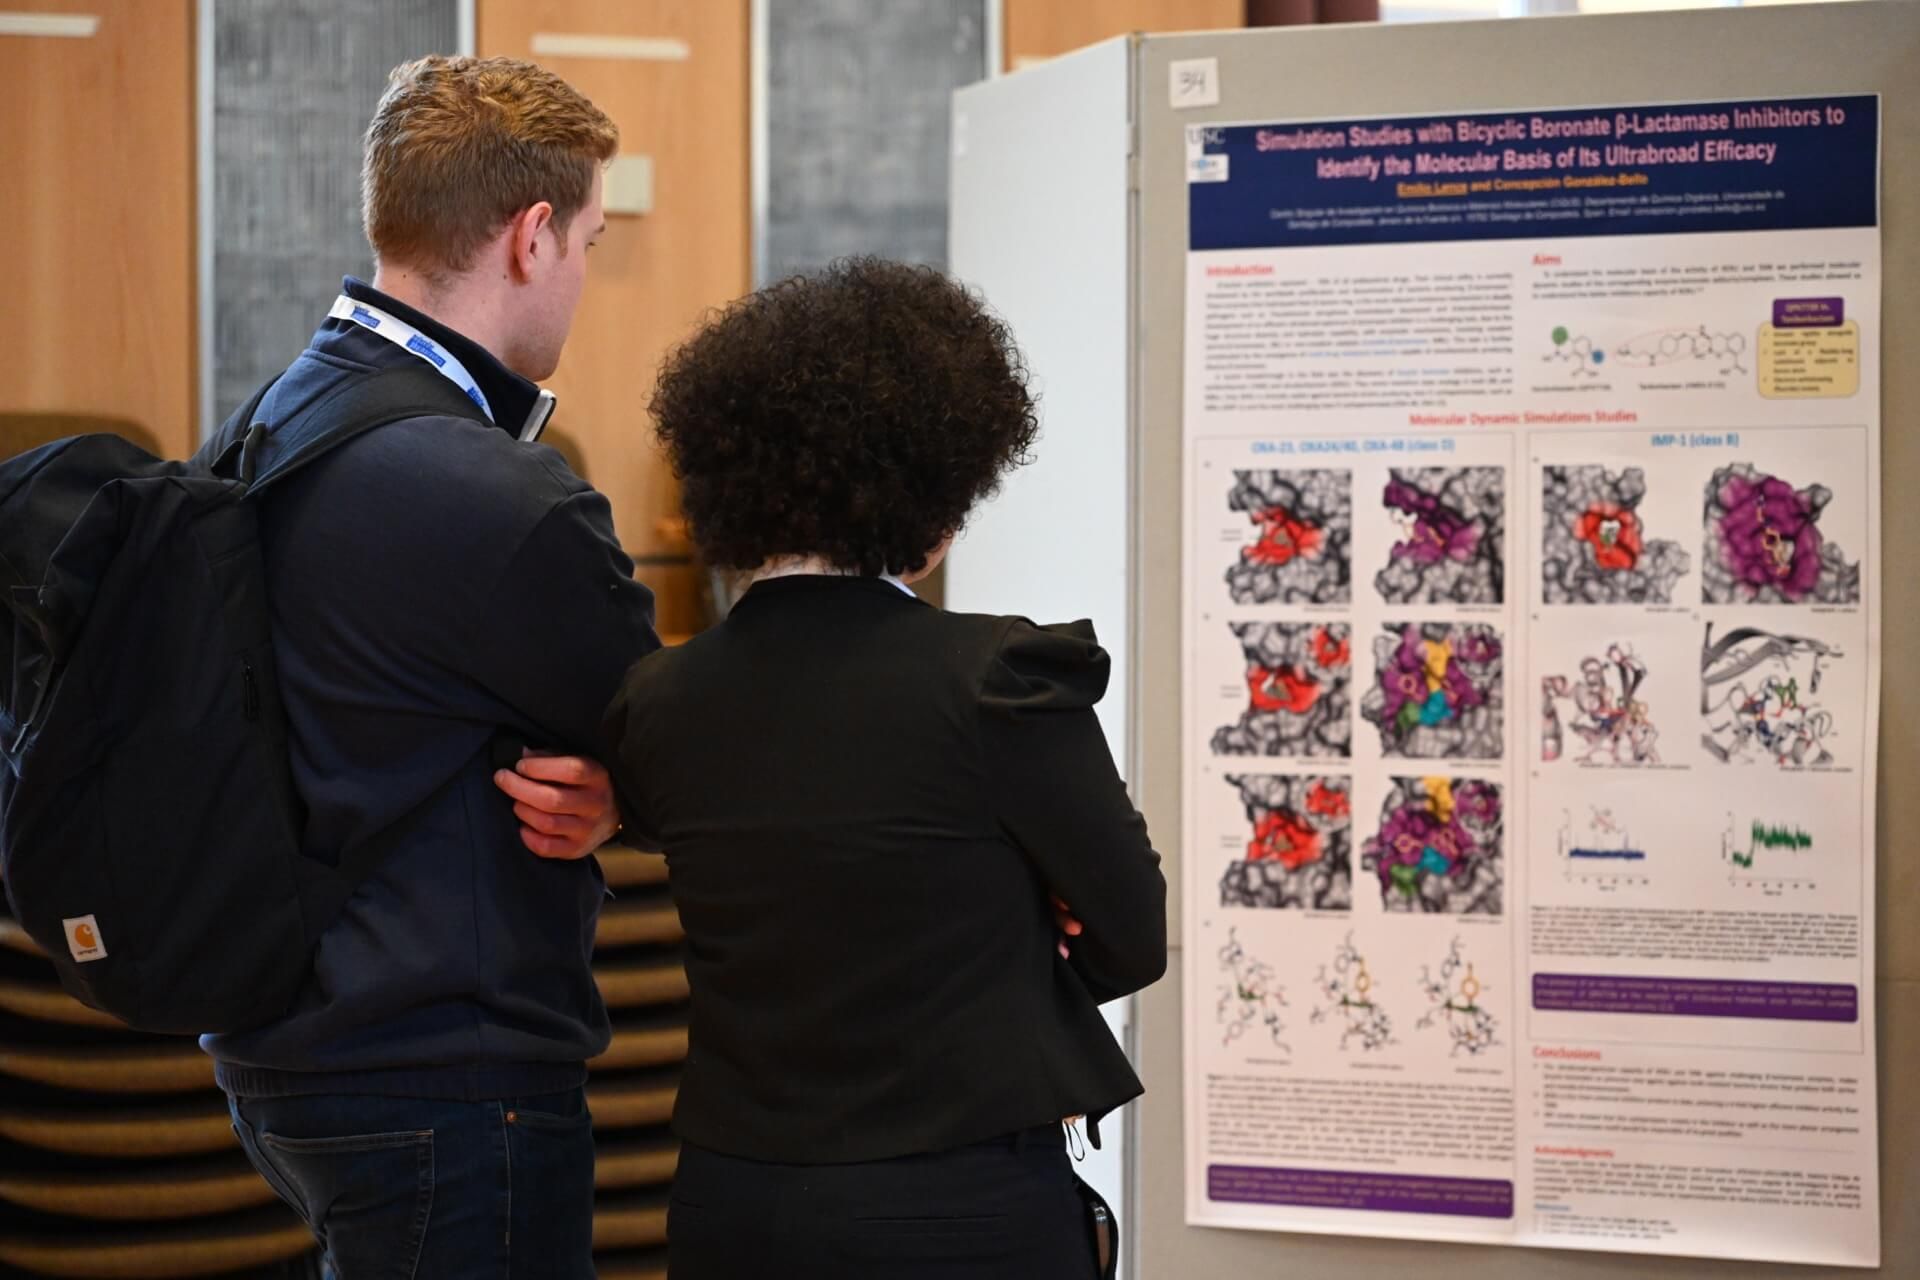 Attendees viewing poster presentations at the Bonn Symposium